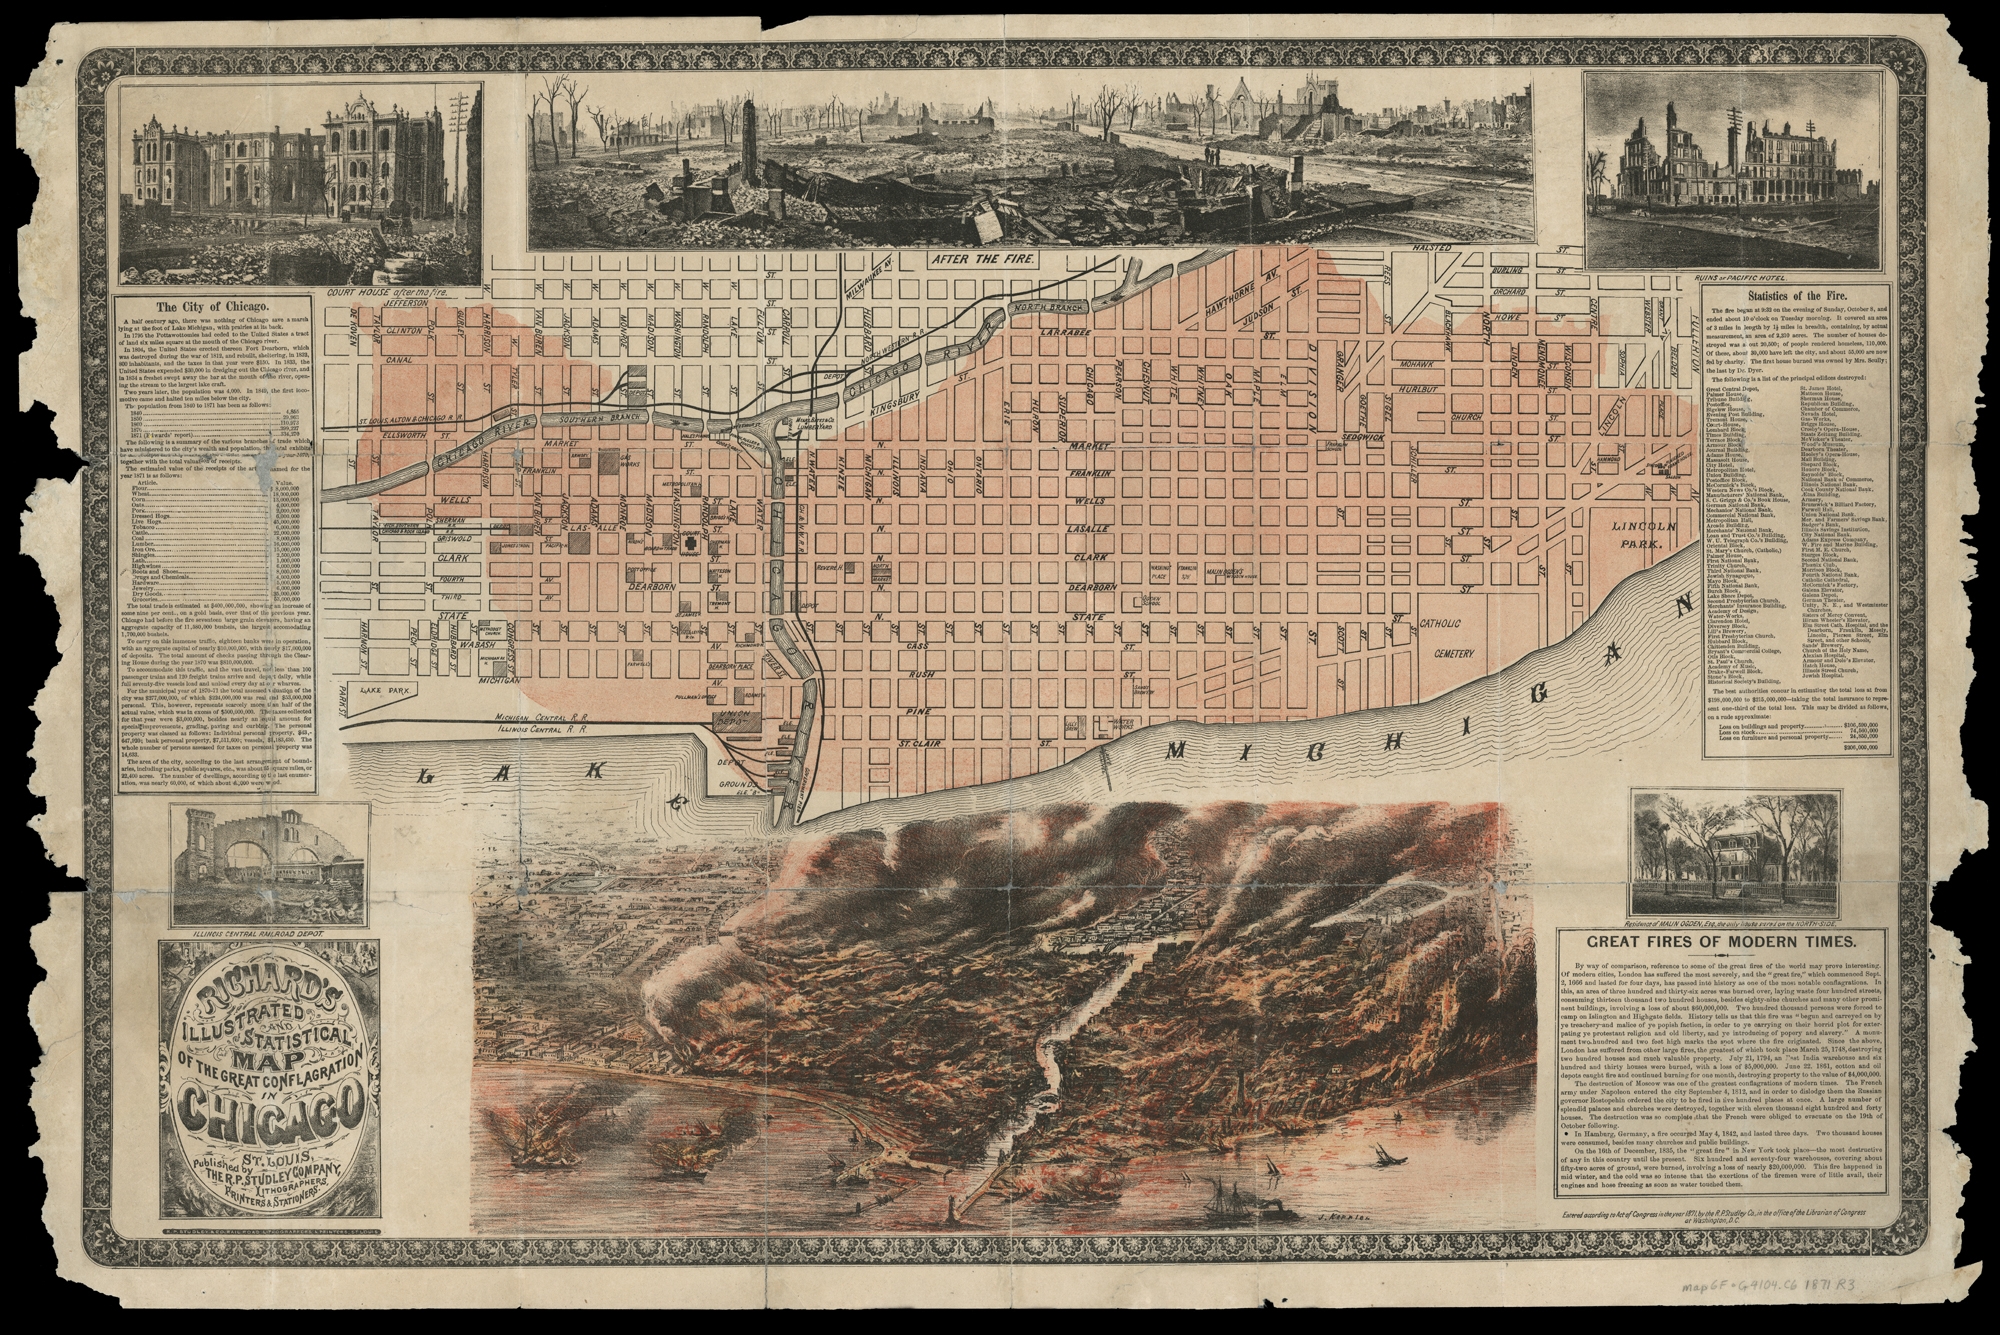 Richard's Illustrated and Statistical Map of the Great Conflagration in Chicago.